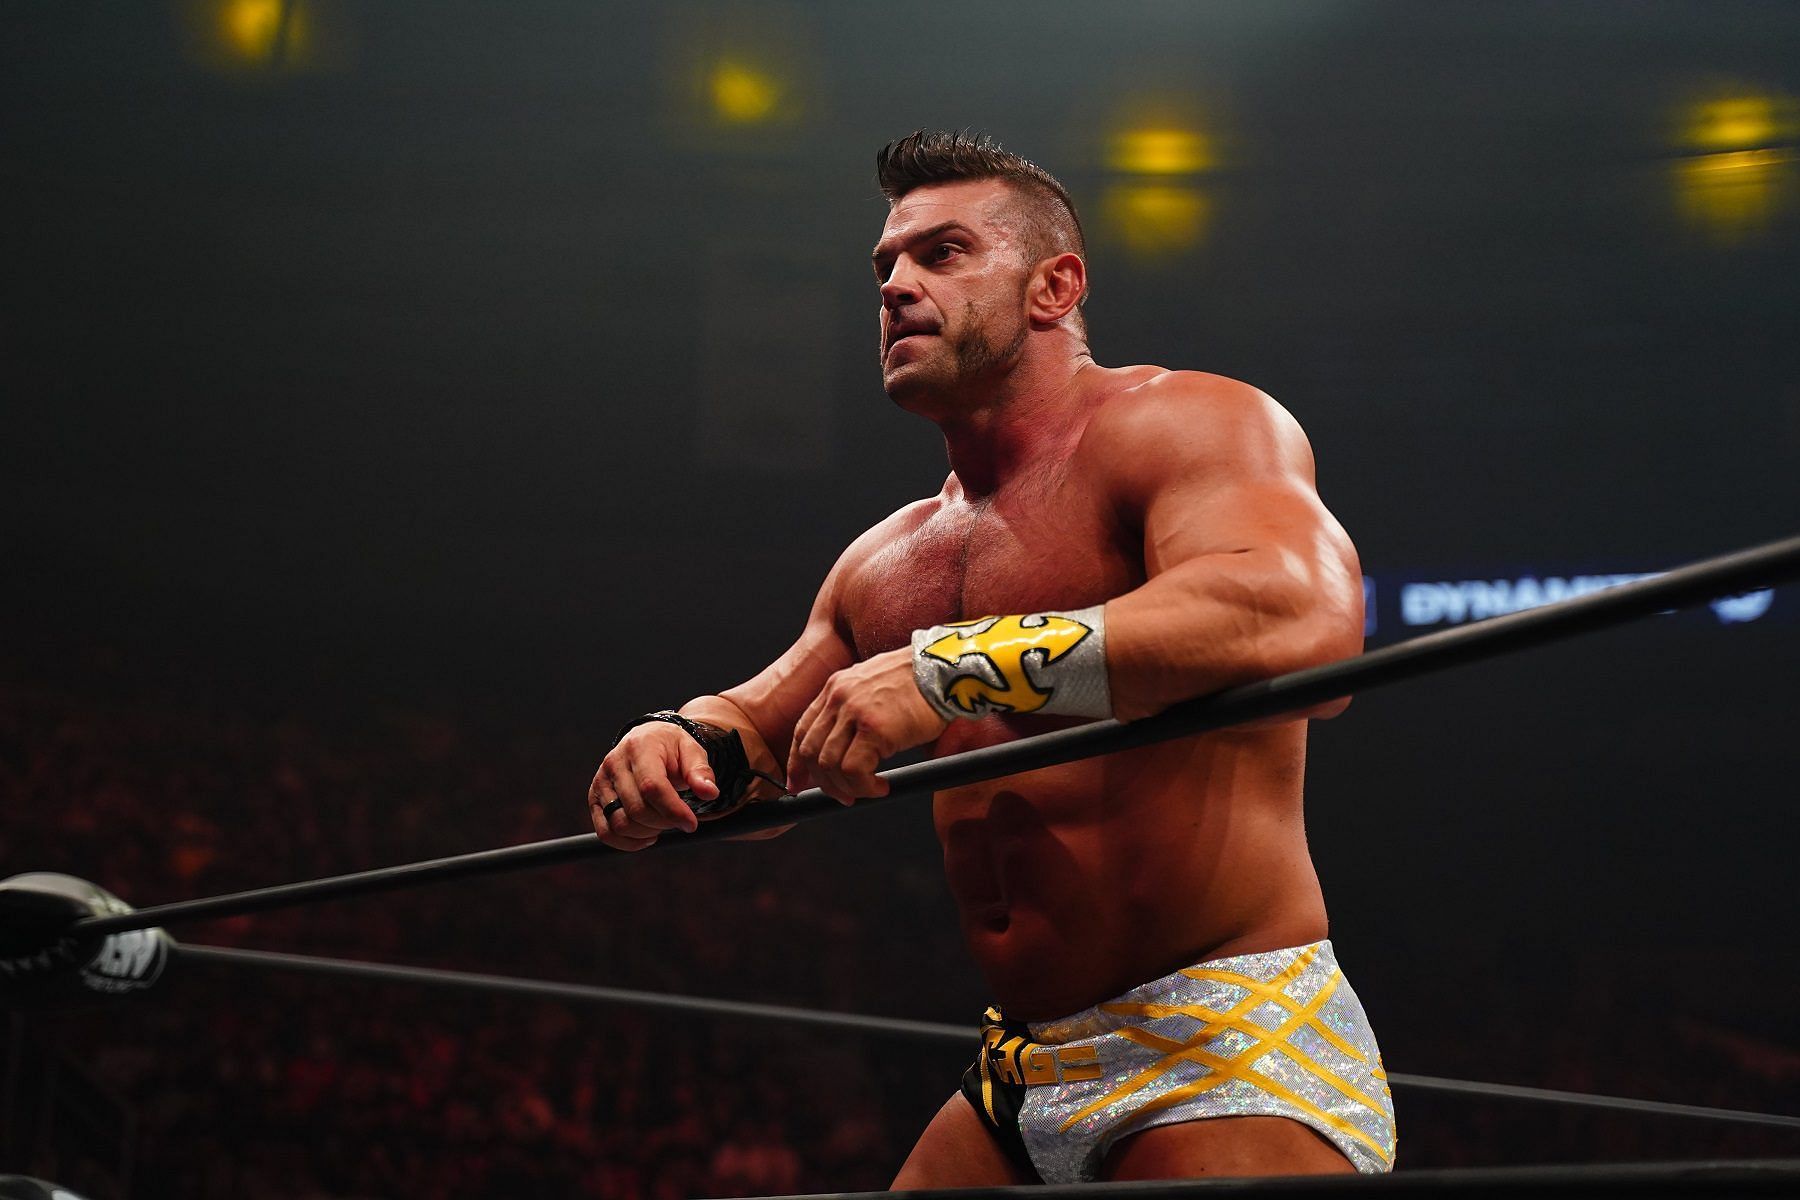 Brian Cage shared his thoughts about his WWE release.